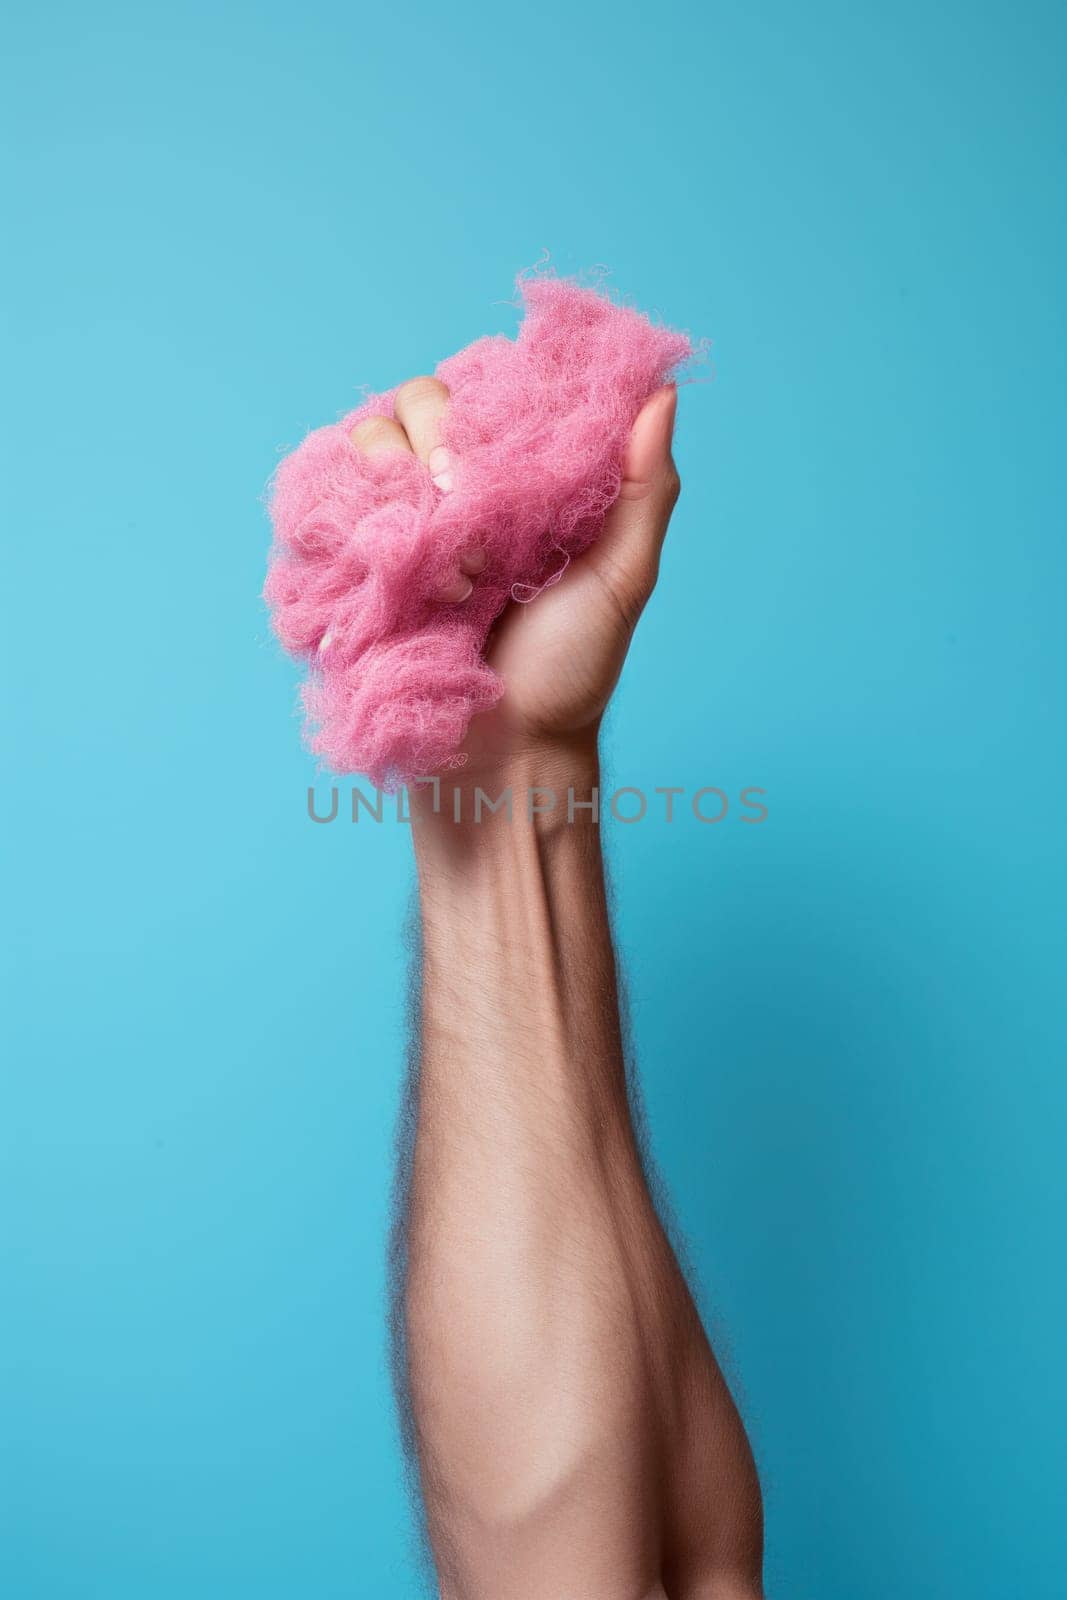 A man's arm holding a pink cotton ball in his fist, AI by starush